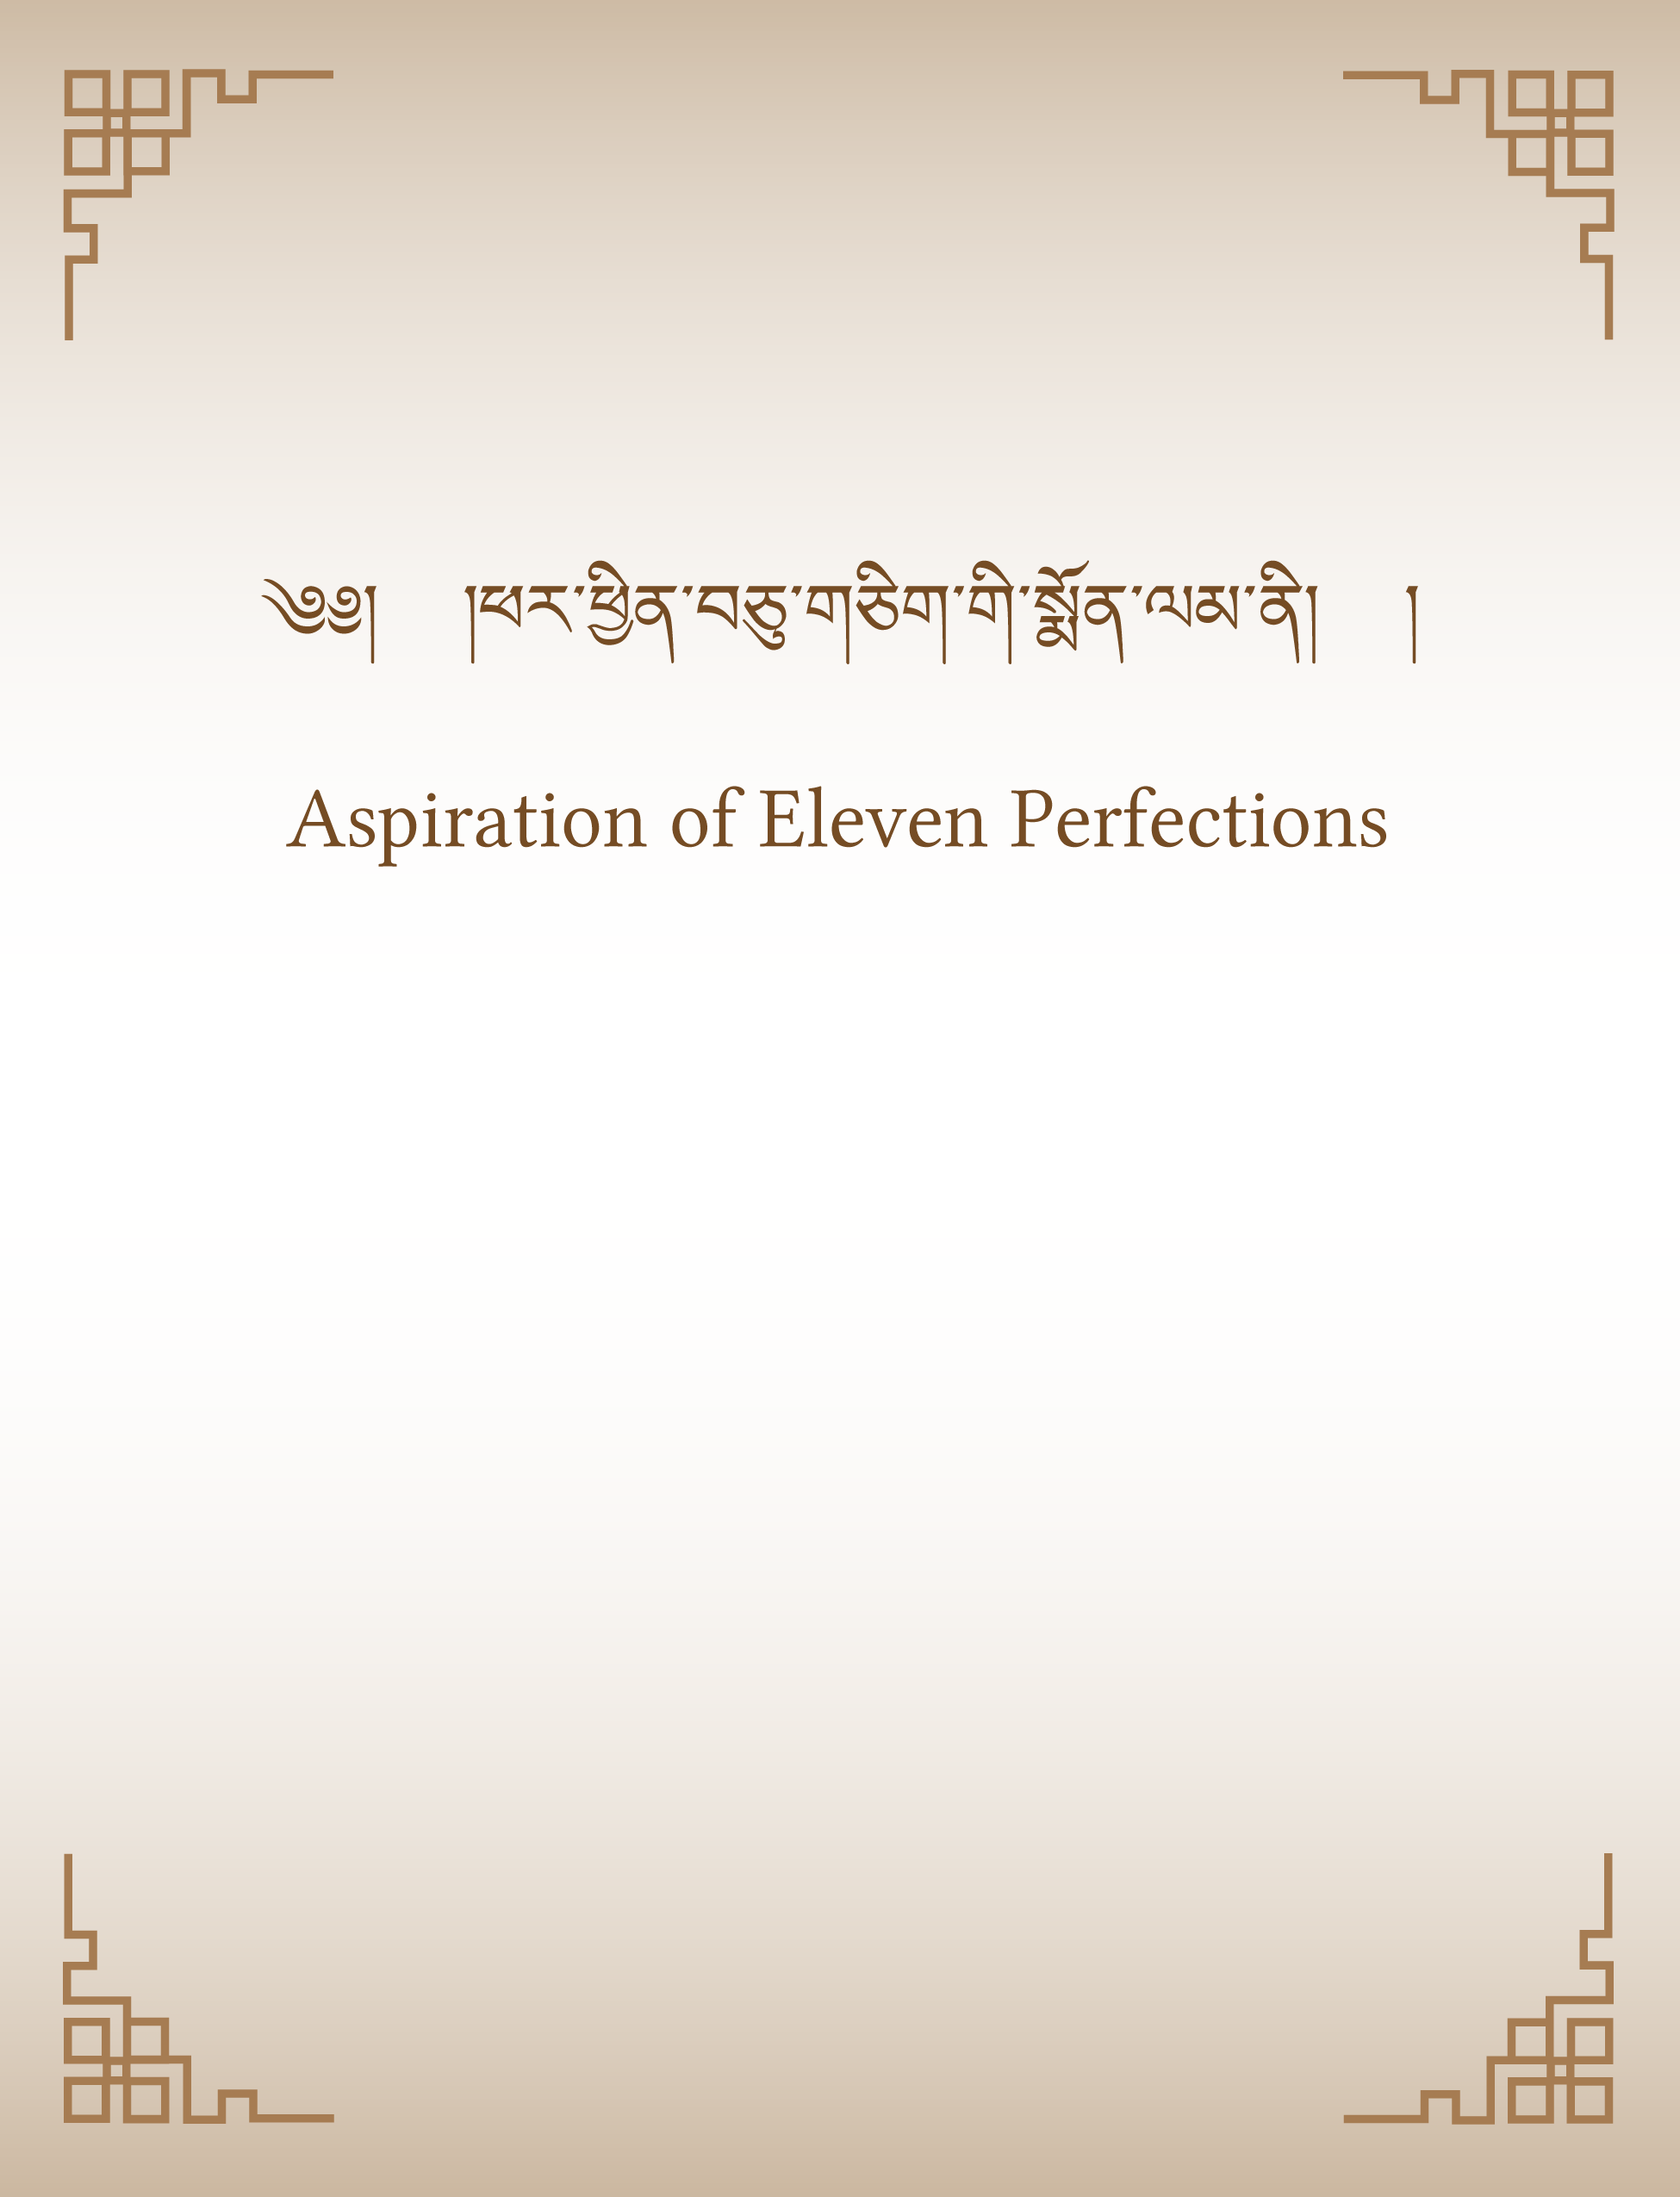 Aspiration of Eleven Perfections